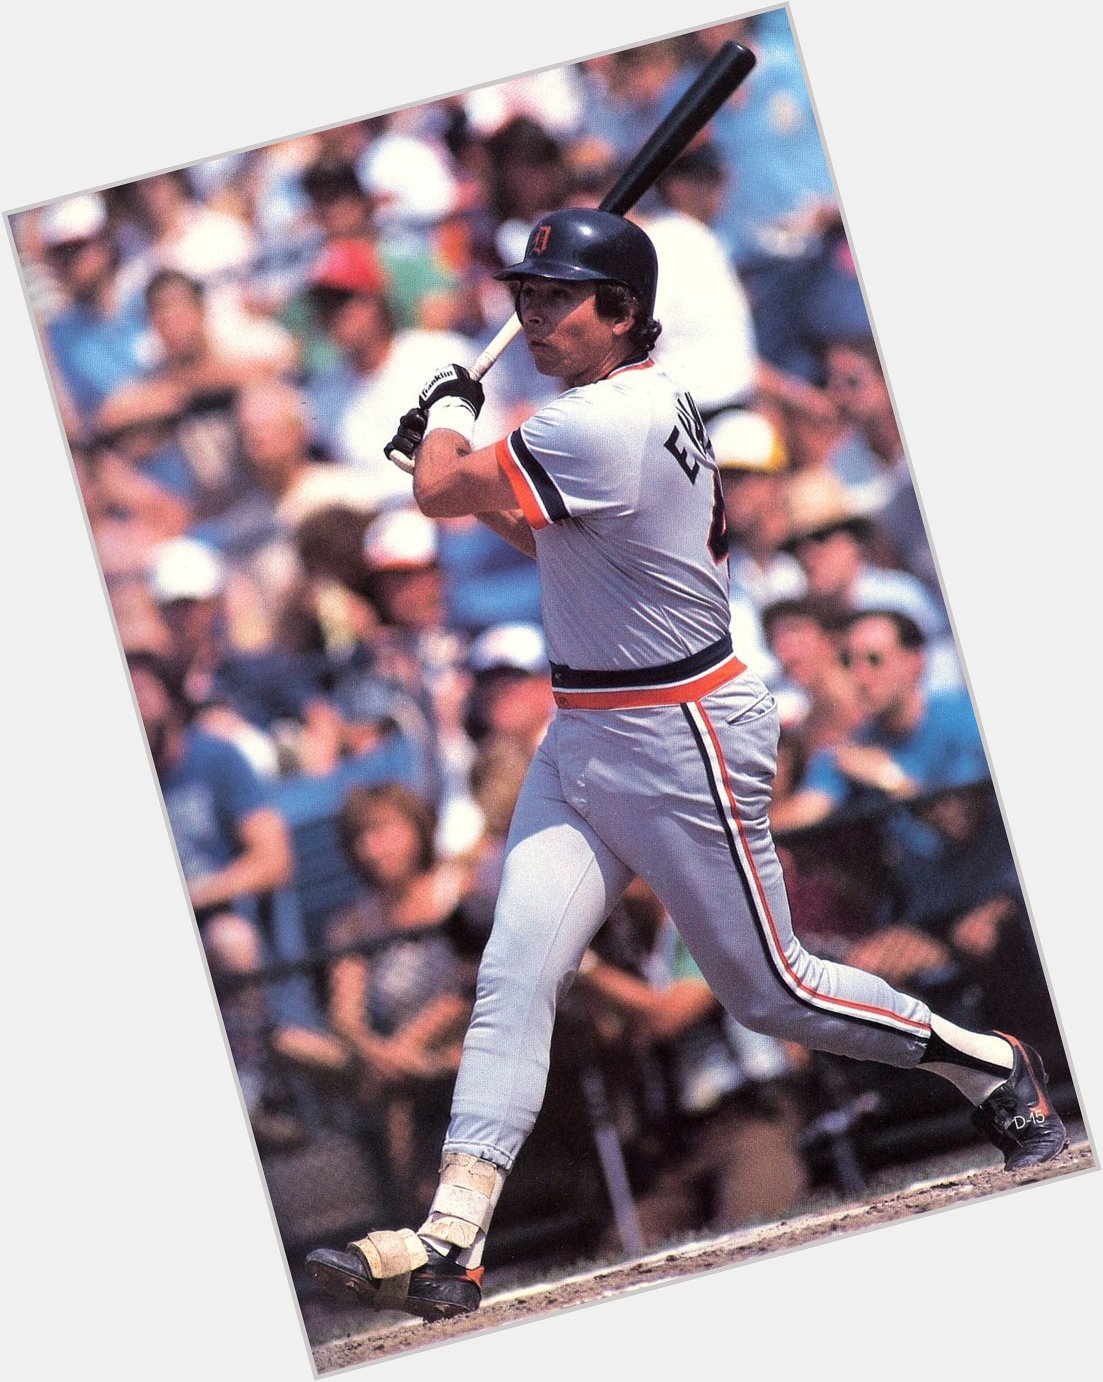 Happy \80s Birthday to Darrell Evans, who quietly hit bombs for 21 years for the  and 